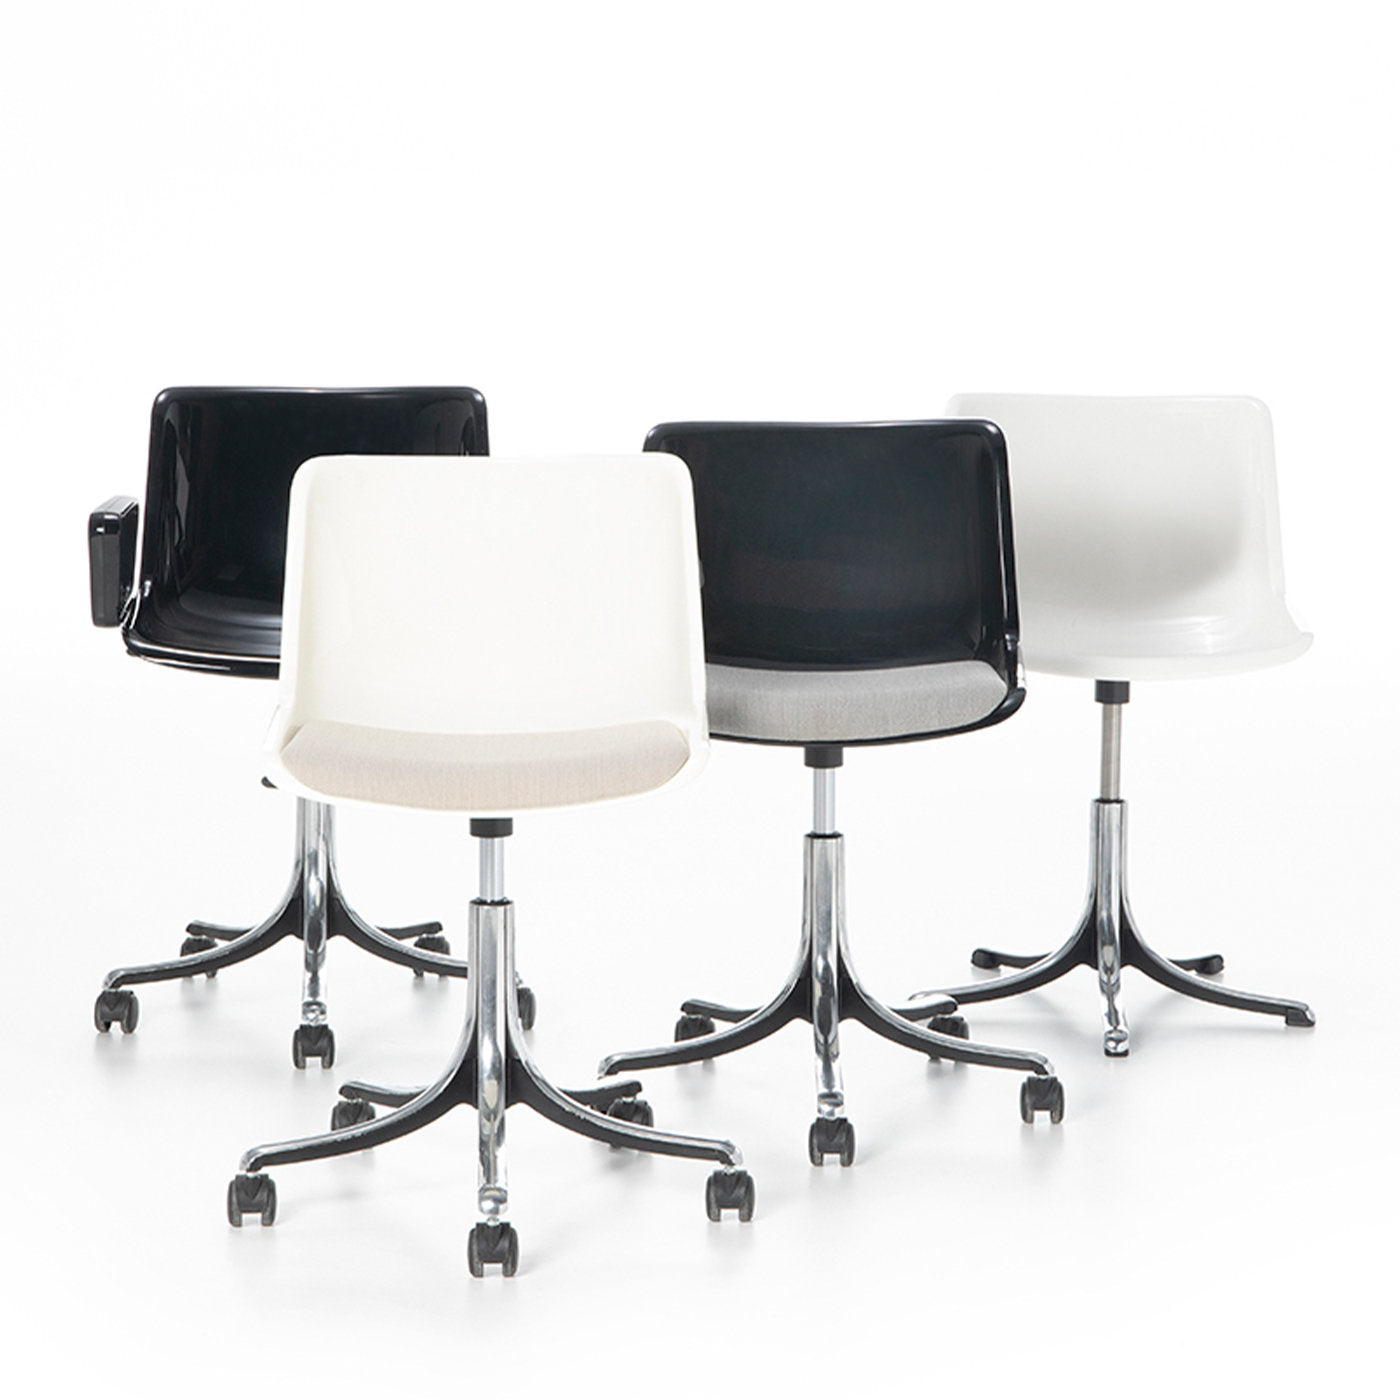 Modus White Chair with Gray Seat Cushion by Centro Progetti Tecno - Alternative view 1